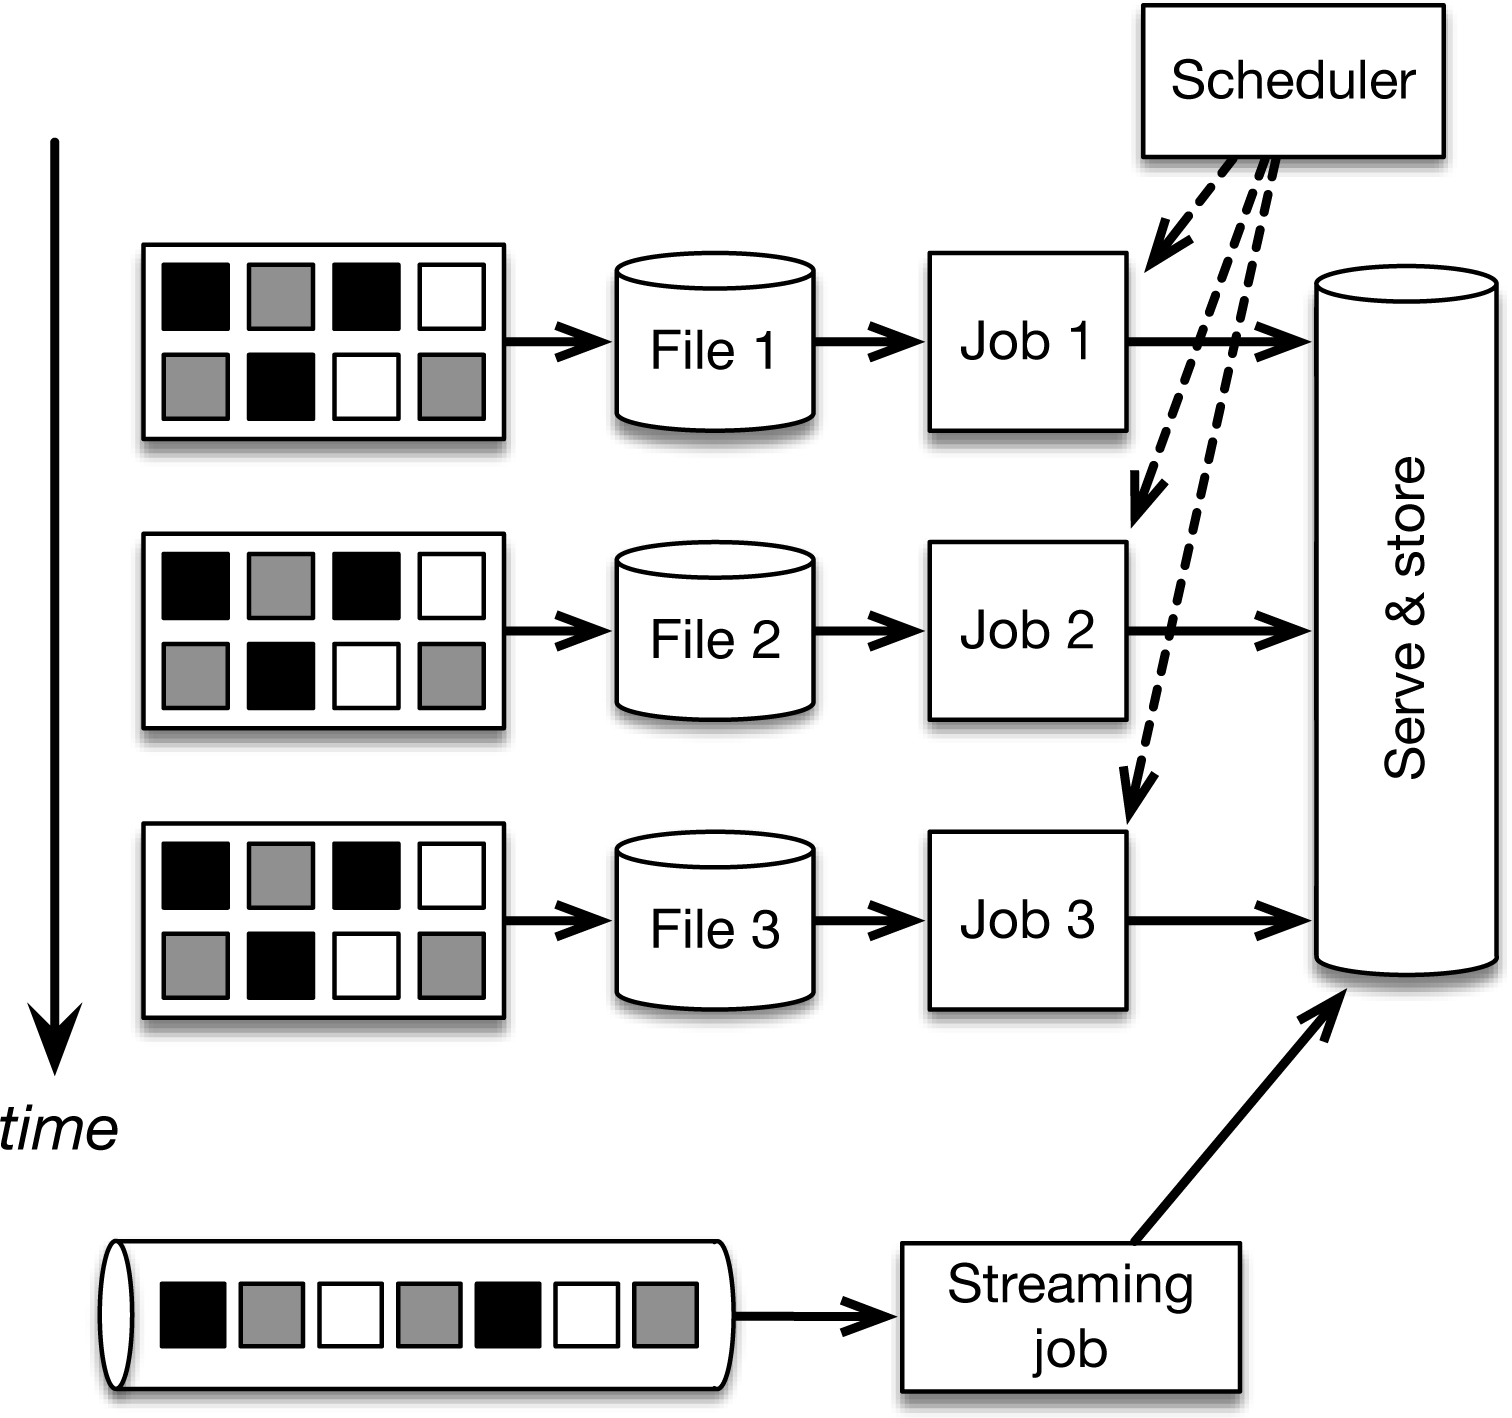 Implementing continuous applications using periodic batch jobs and early results using a stream processor (Lambda architecture). The stream processor is used to provide approximate but real-time results, which are eventually corrected by the batch layer.